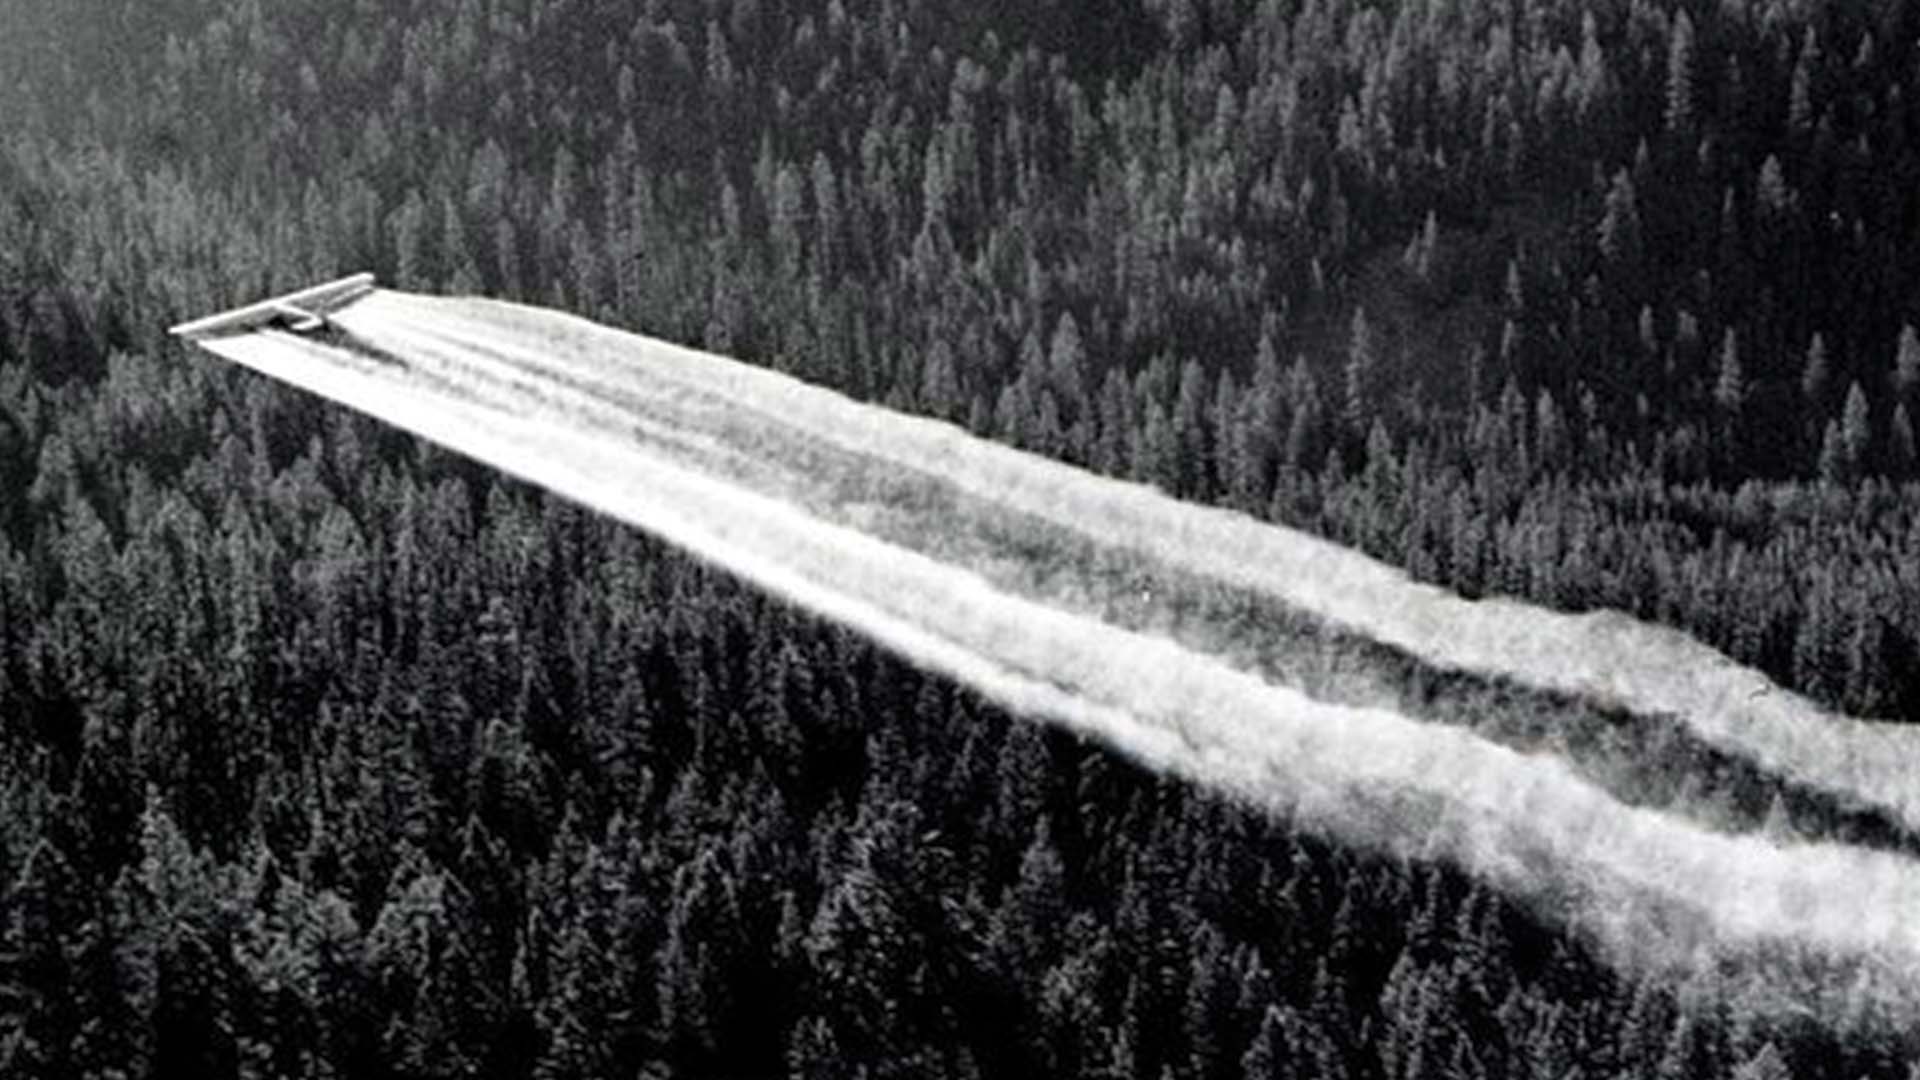 DDT spraying out of plane on forest